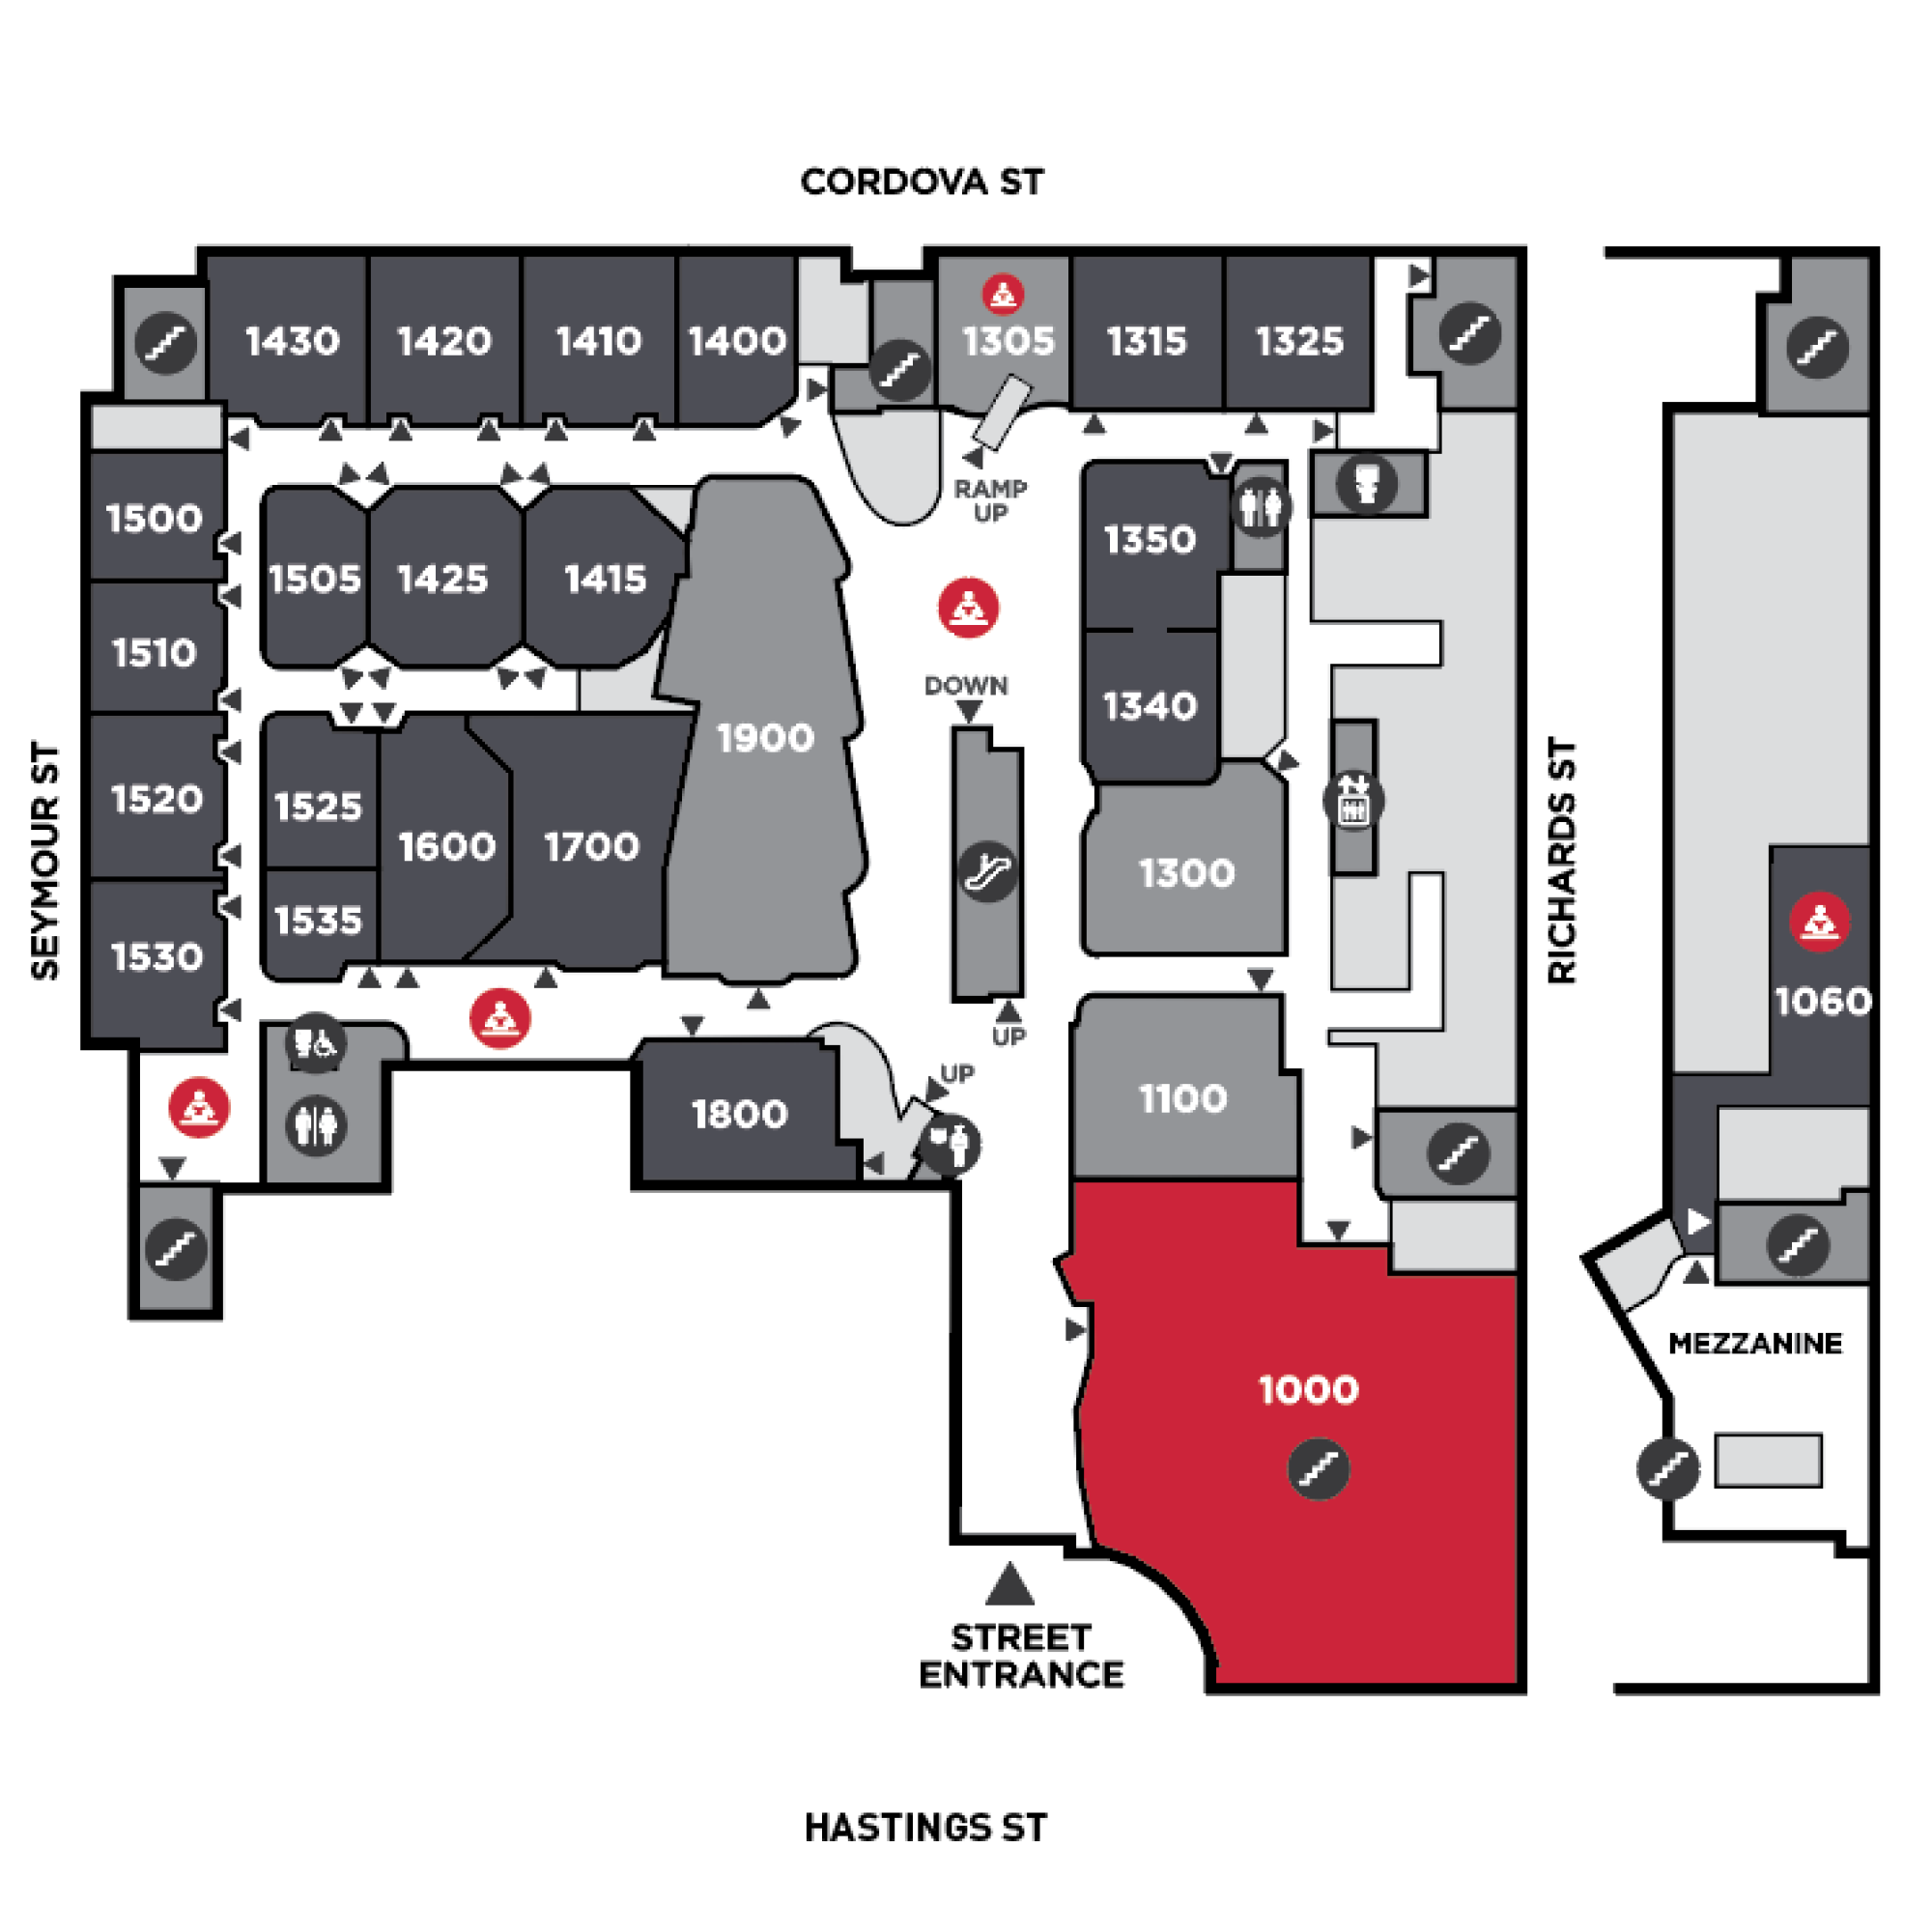 First level floor plan highlighting study spaces